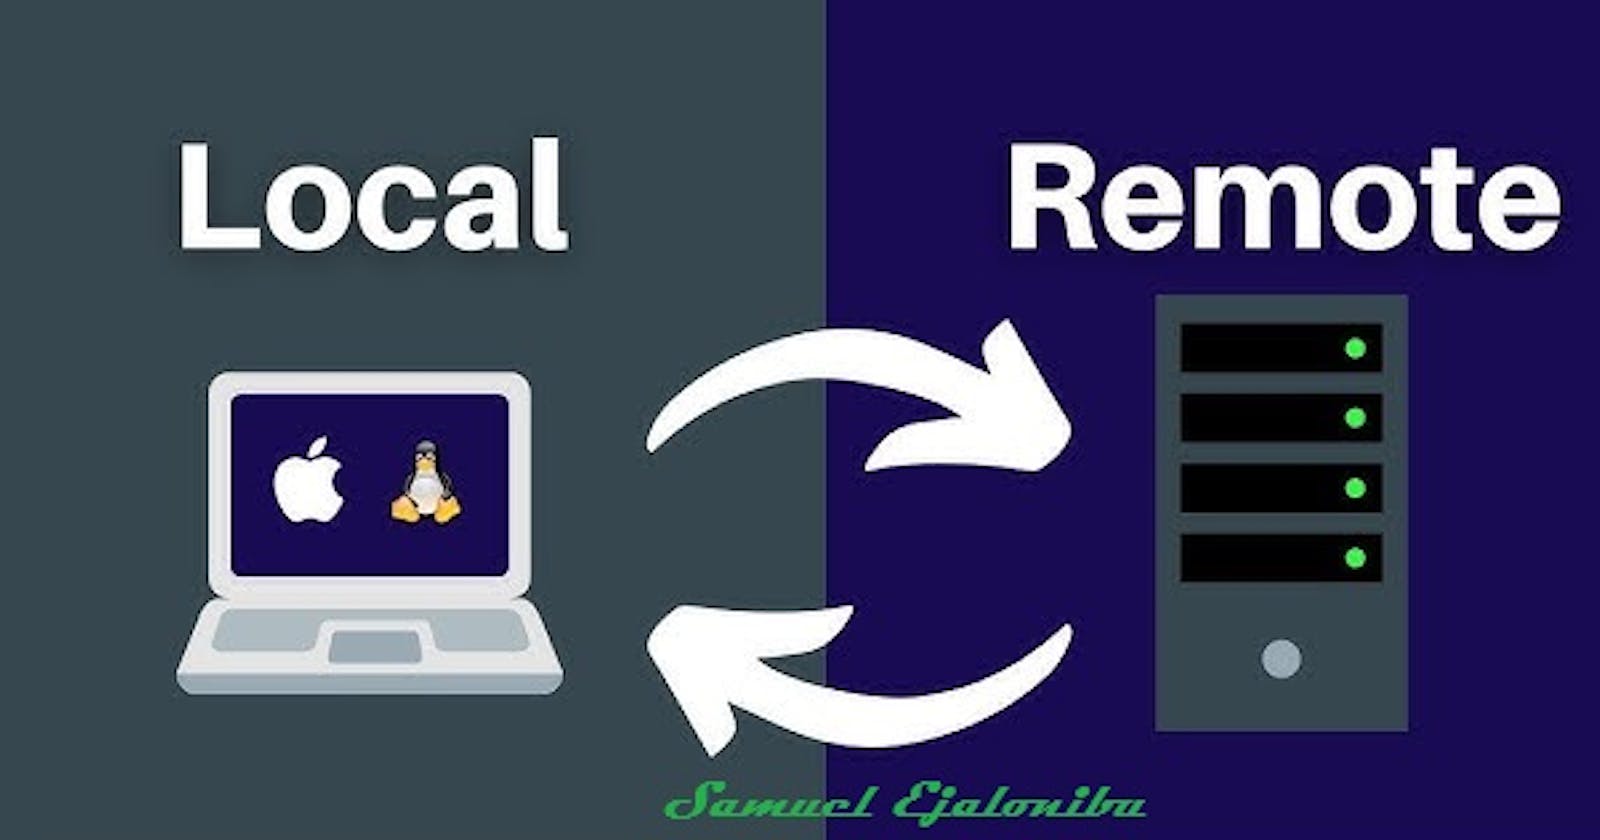 Transferring a file from Local Machine to Remote Server